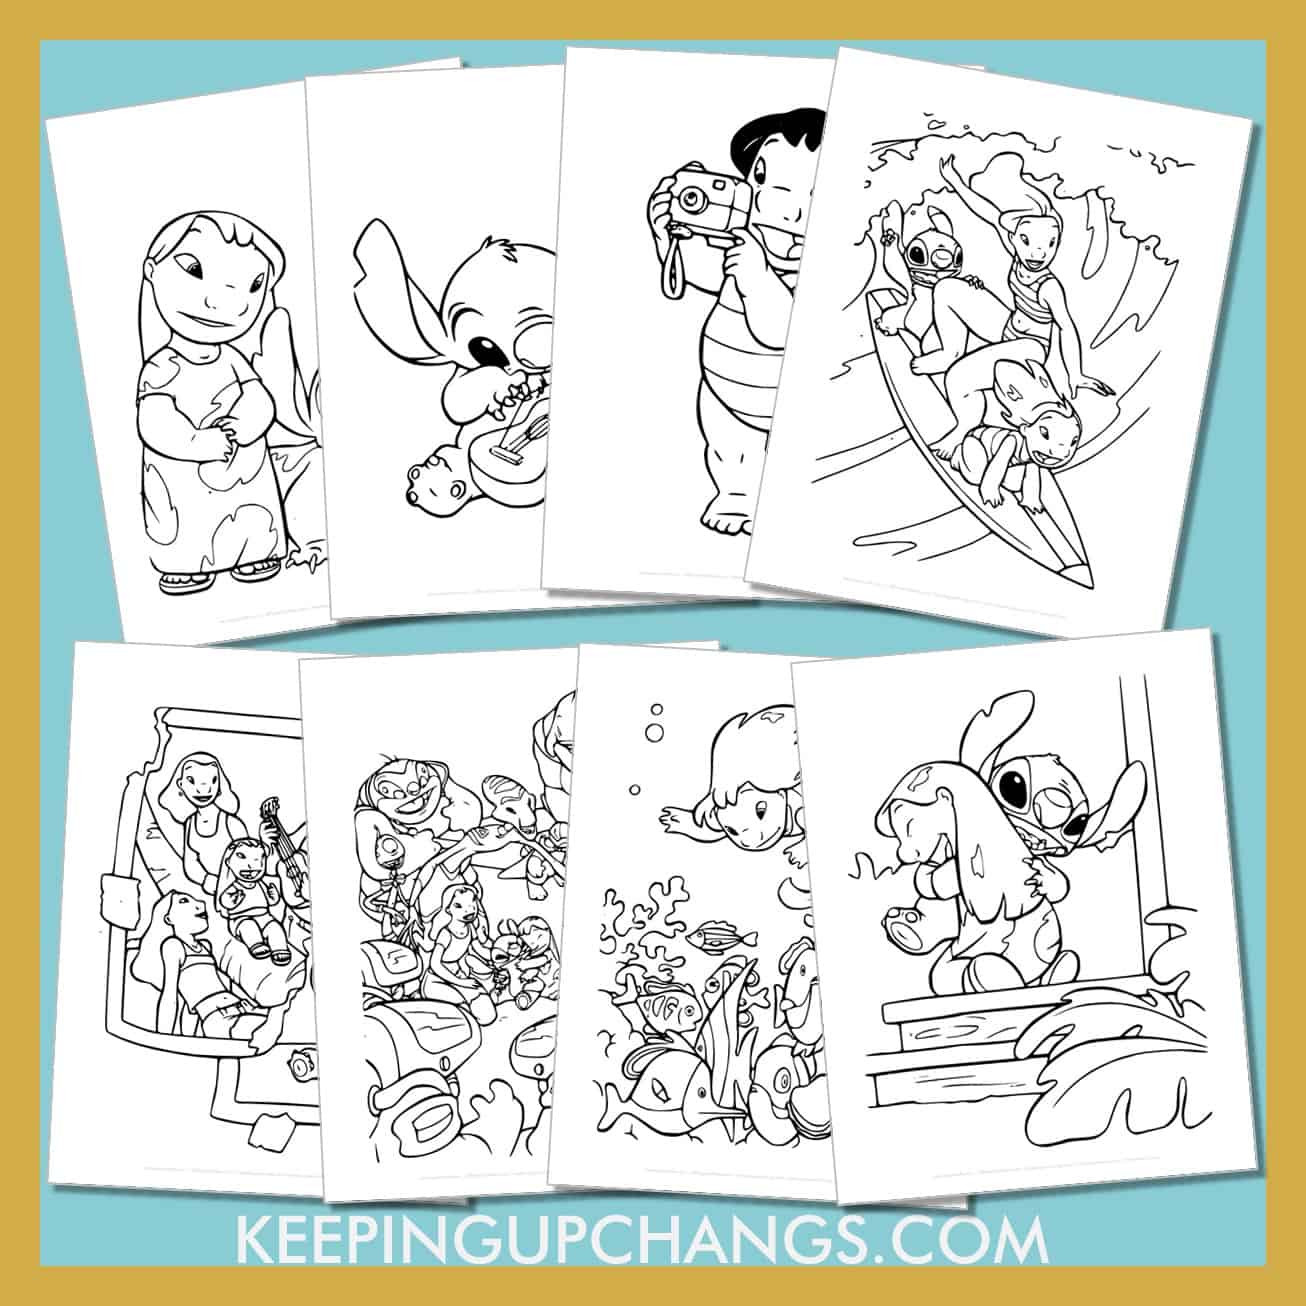 lilo and stitch colouring sheets including surfing, beach, hula, family ohana, and more.